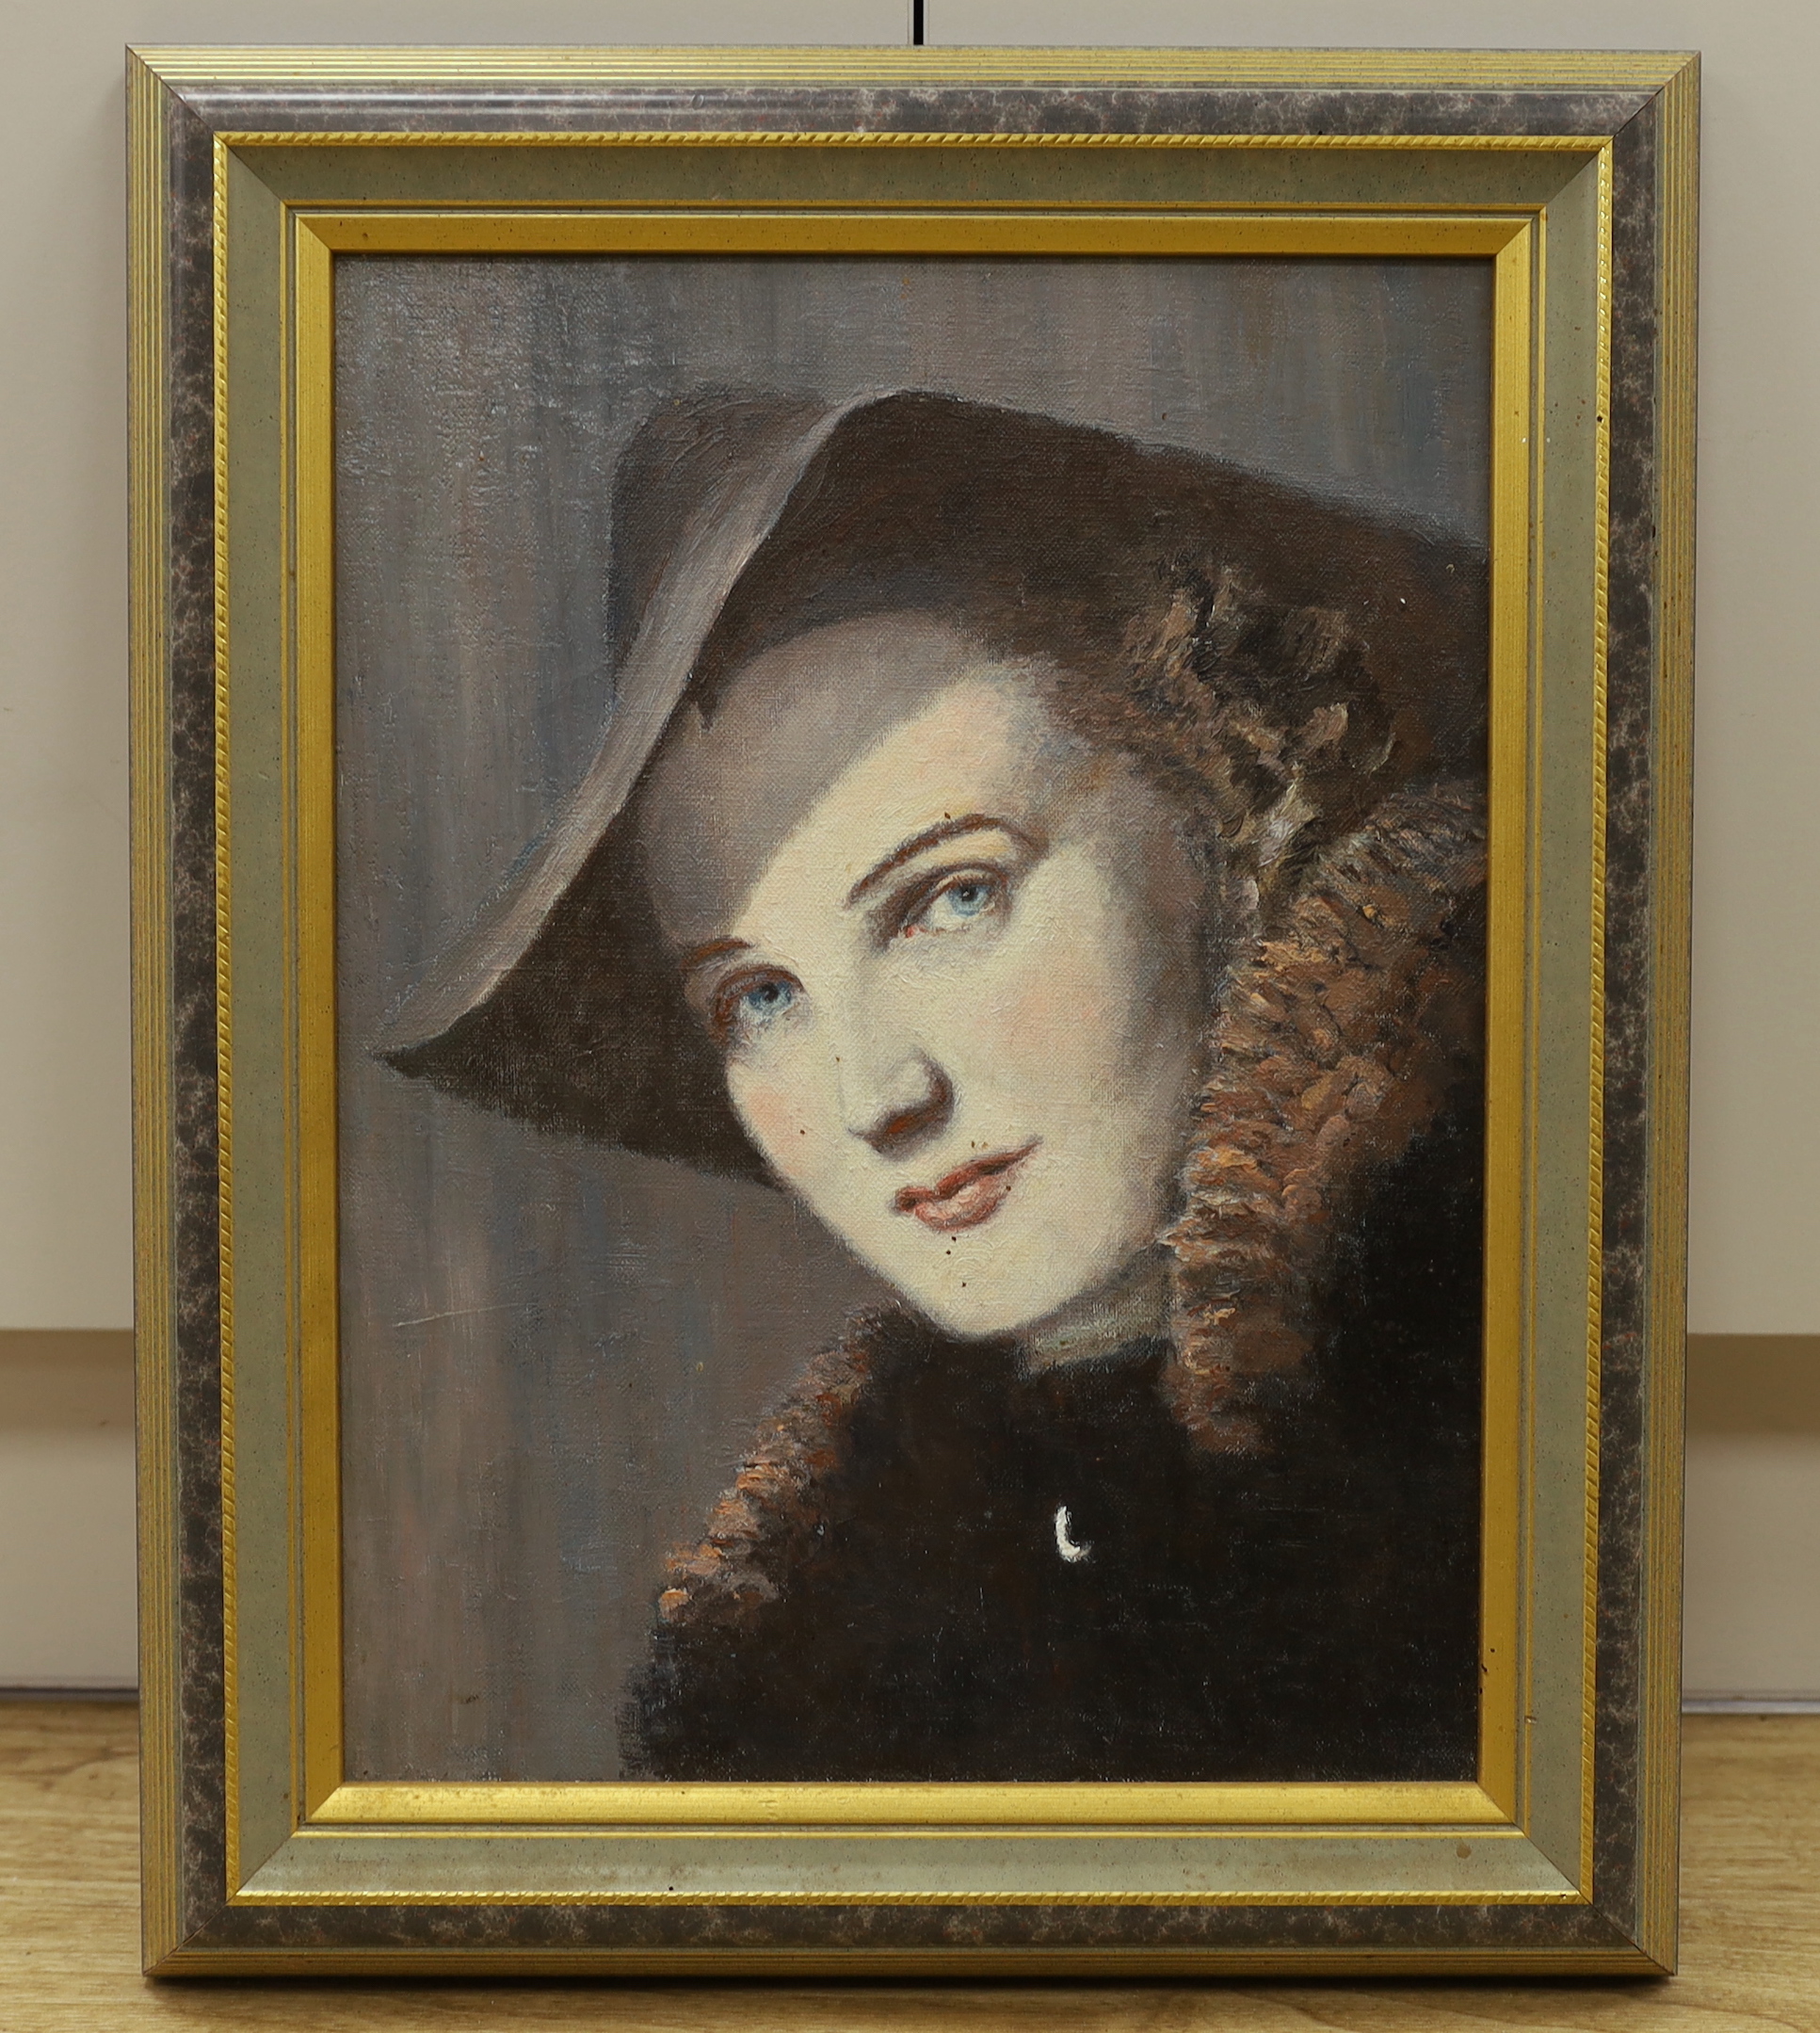 Oil on canvas, Portrait of a lady with fur collar, possibly a movie star, 42 x 32cm